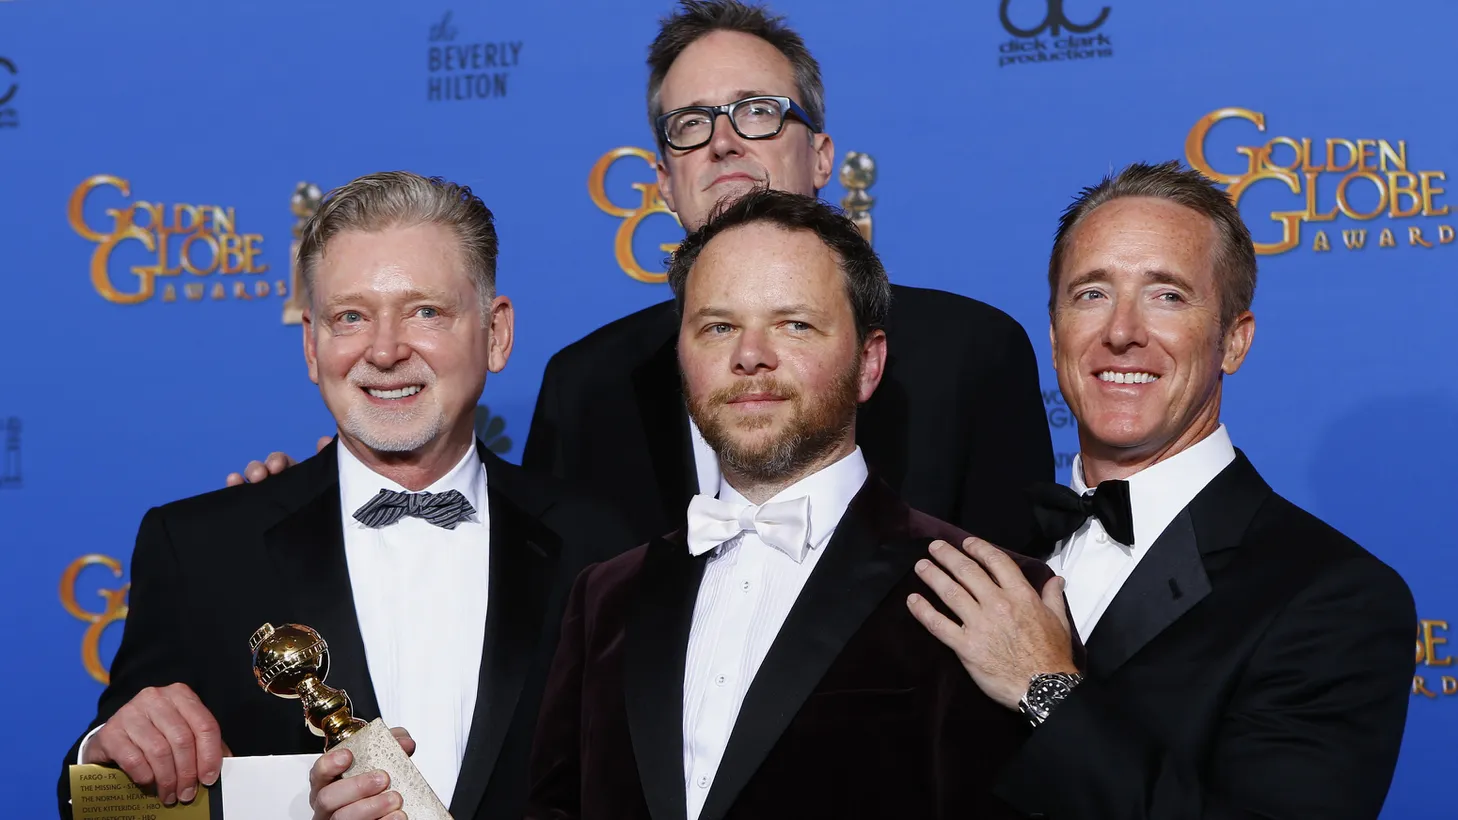 Executive producer Noah Hawley (C) holds the award for Best TV Movie or Mini-Series for "Fargo" along with fellow producers Warren Littlefield (L), Adam Bernstein (rear) and Geyer Kosinski (R) backstage at the 72nd Golden Globe Awards in Beverly Hills, California January 11, 2015.